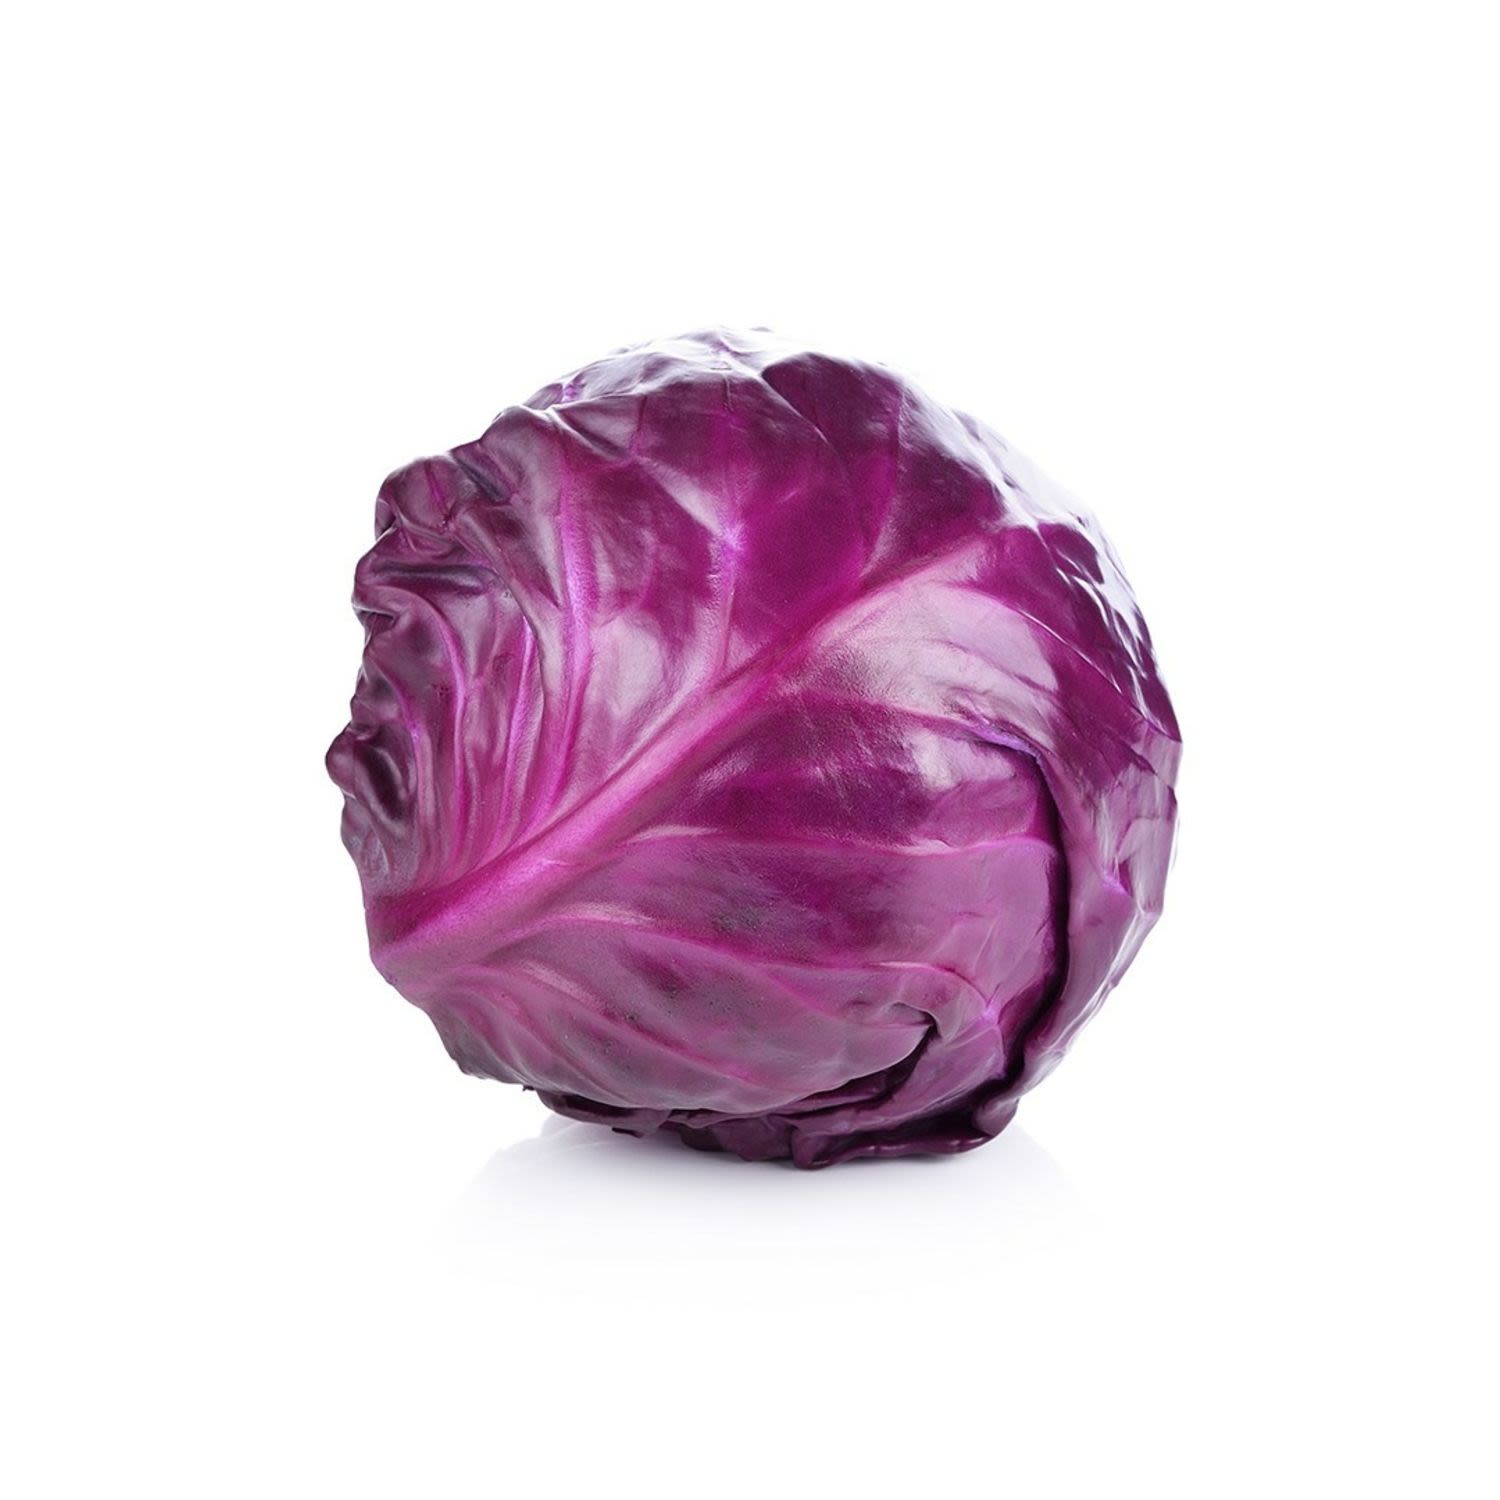 Whole Red Cabbage, 1 Each